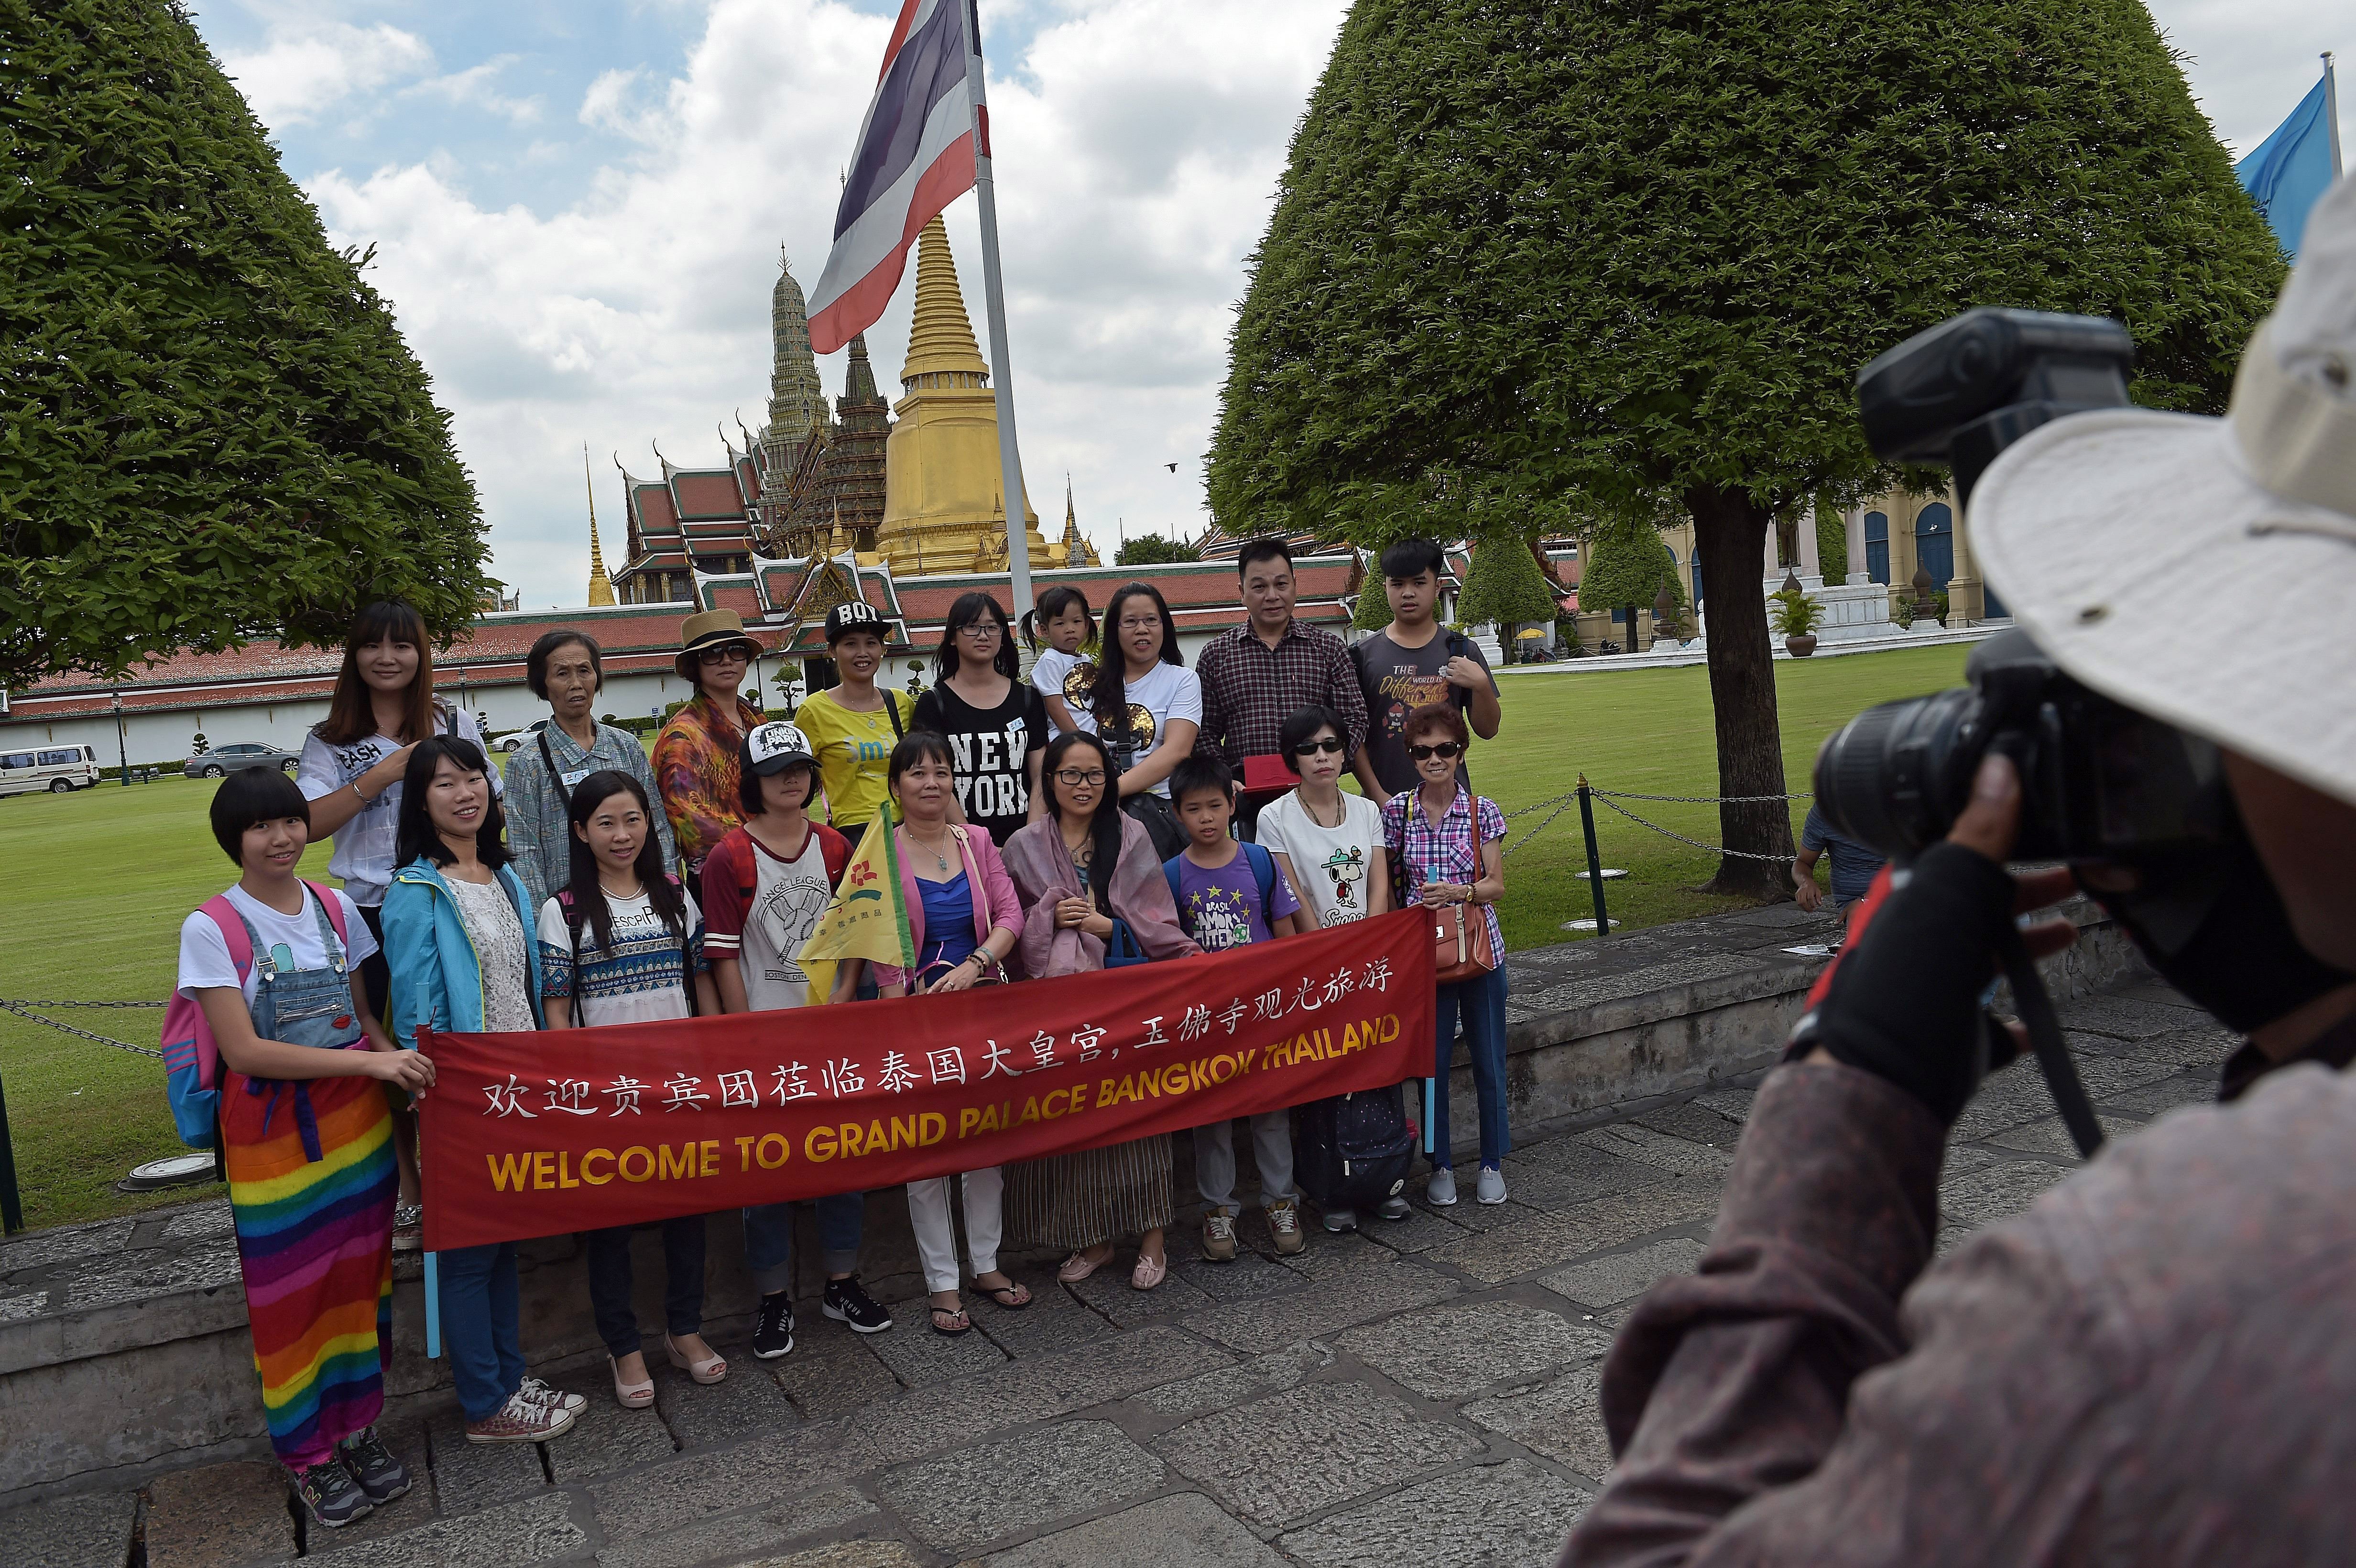 A group of Chinese tourists pose for a picture before visiting the Grand Palace in Bangkok. Photo: AFP